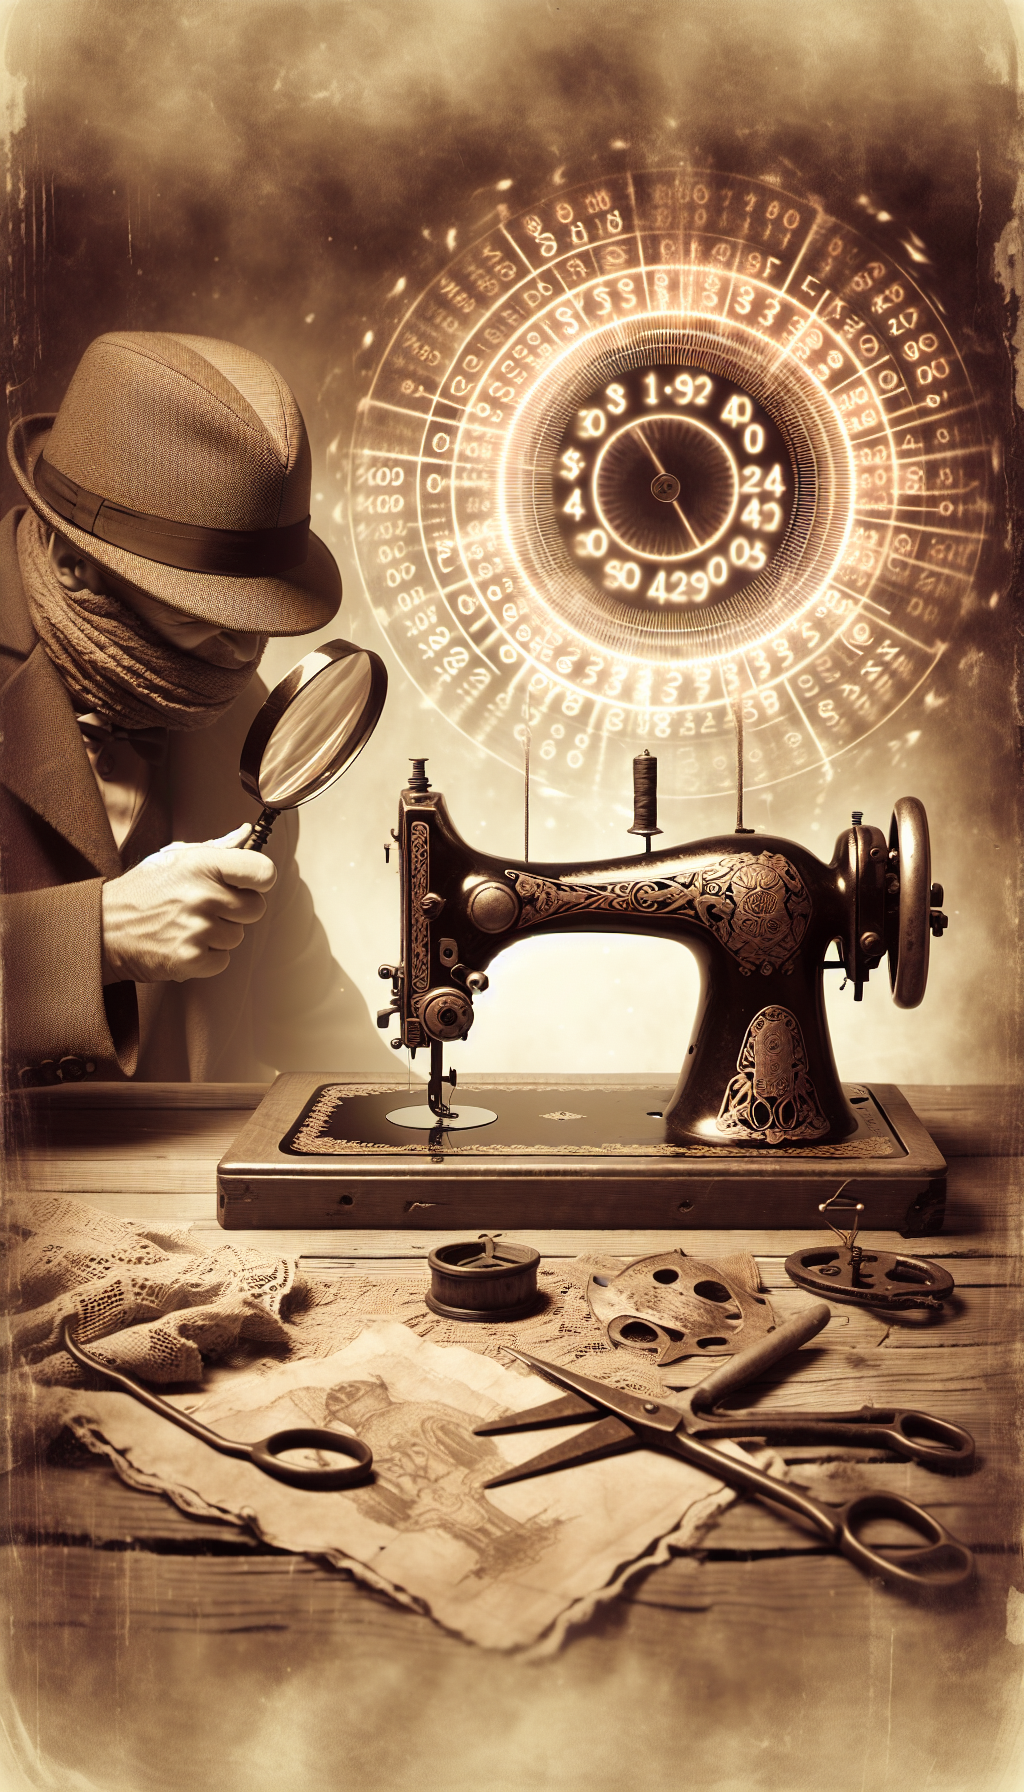 A sepia-toned sketch vignette features Sherlock Holmes, magnifying glass in hand, peering into the intricate workings of an ornate Singer sewing machine. A ghostly price tag swirls in the background, revealing fluctuating numbers that hint at its volatile value, as curious antique tools and faded sewing patterns are scattered around, inviting the viewer to solve the value mystery.